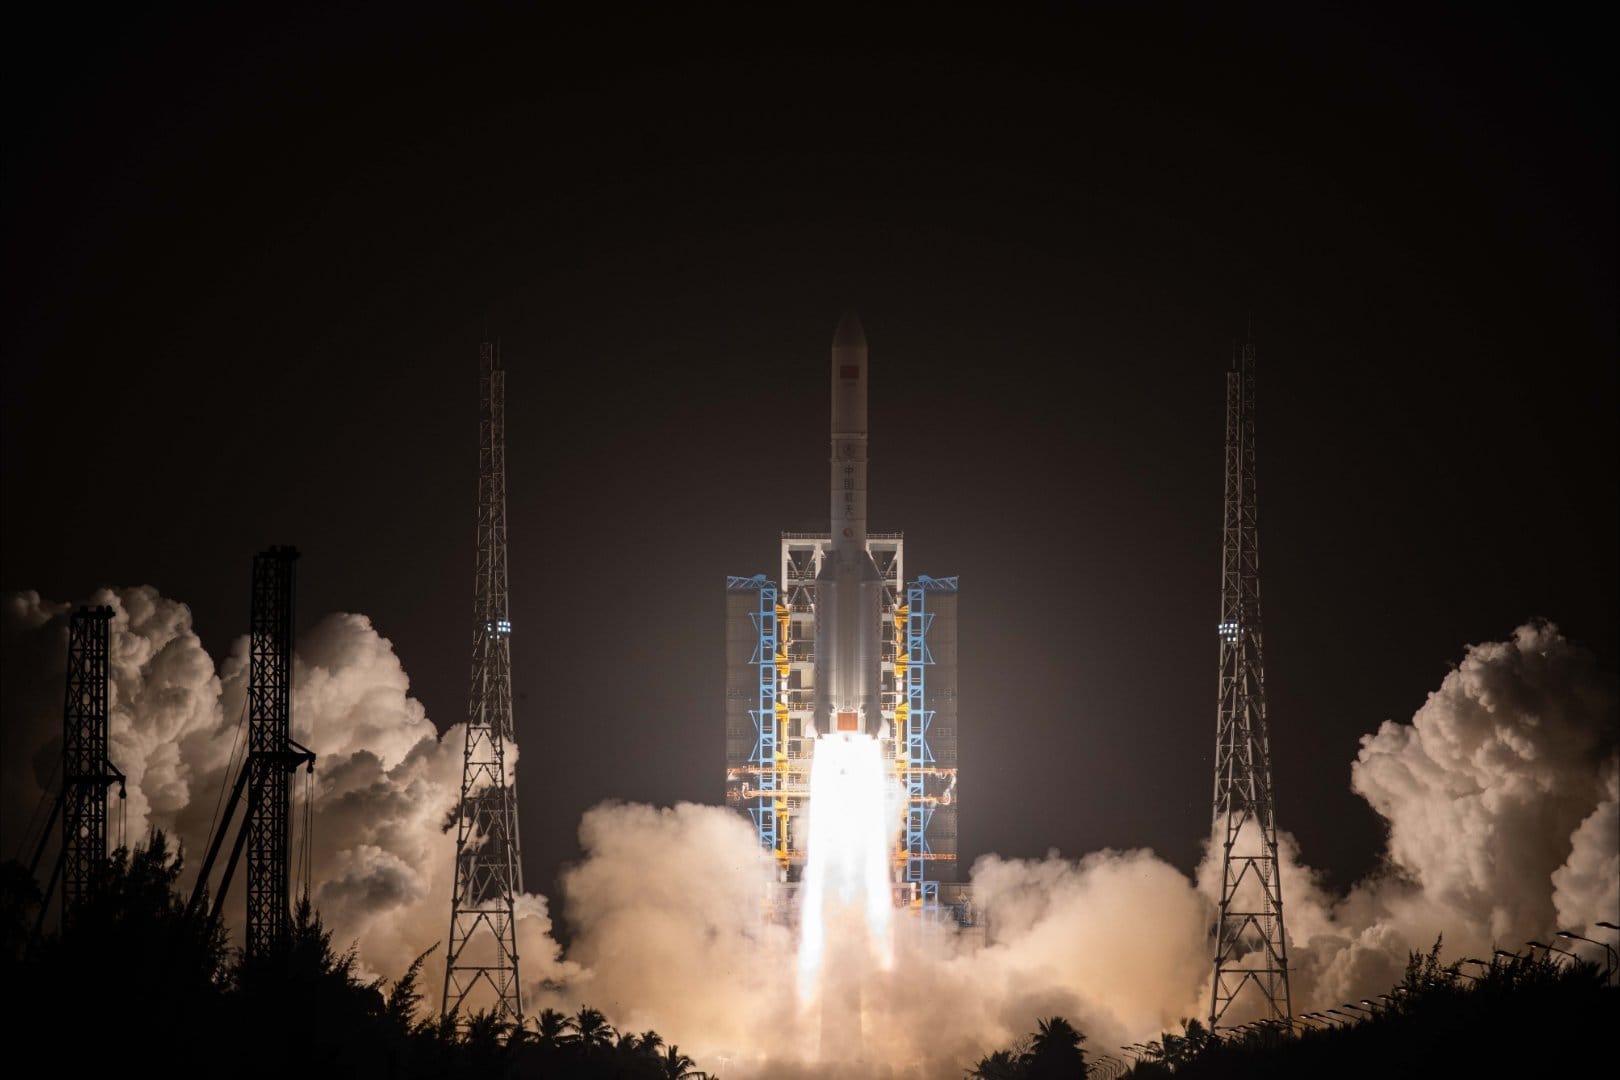 A Long March 5 lifting off from the Wenchang Space Launch Site.